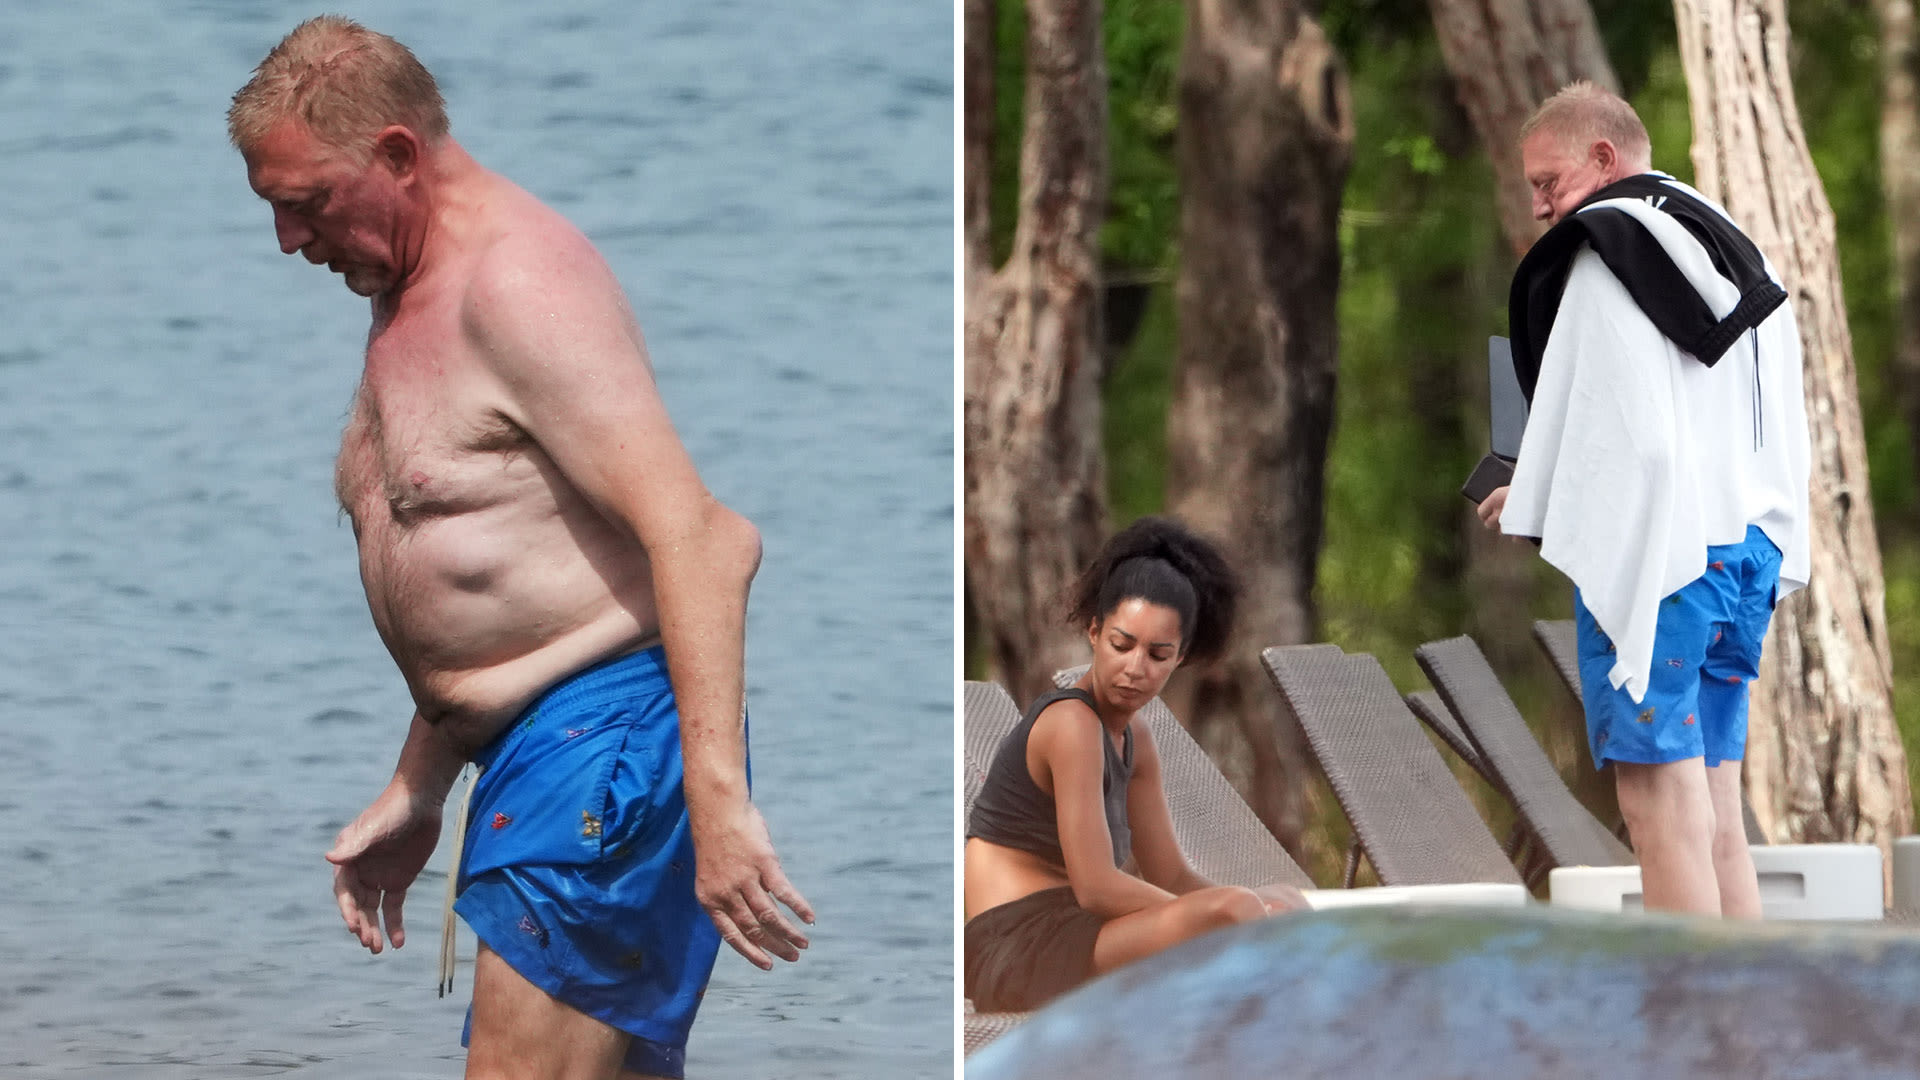 Becker shows elbow injury as he hits beach with fiancee 23 years his junior